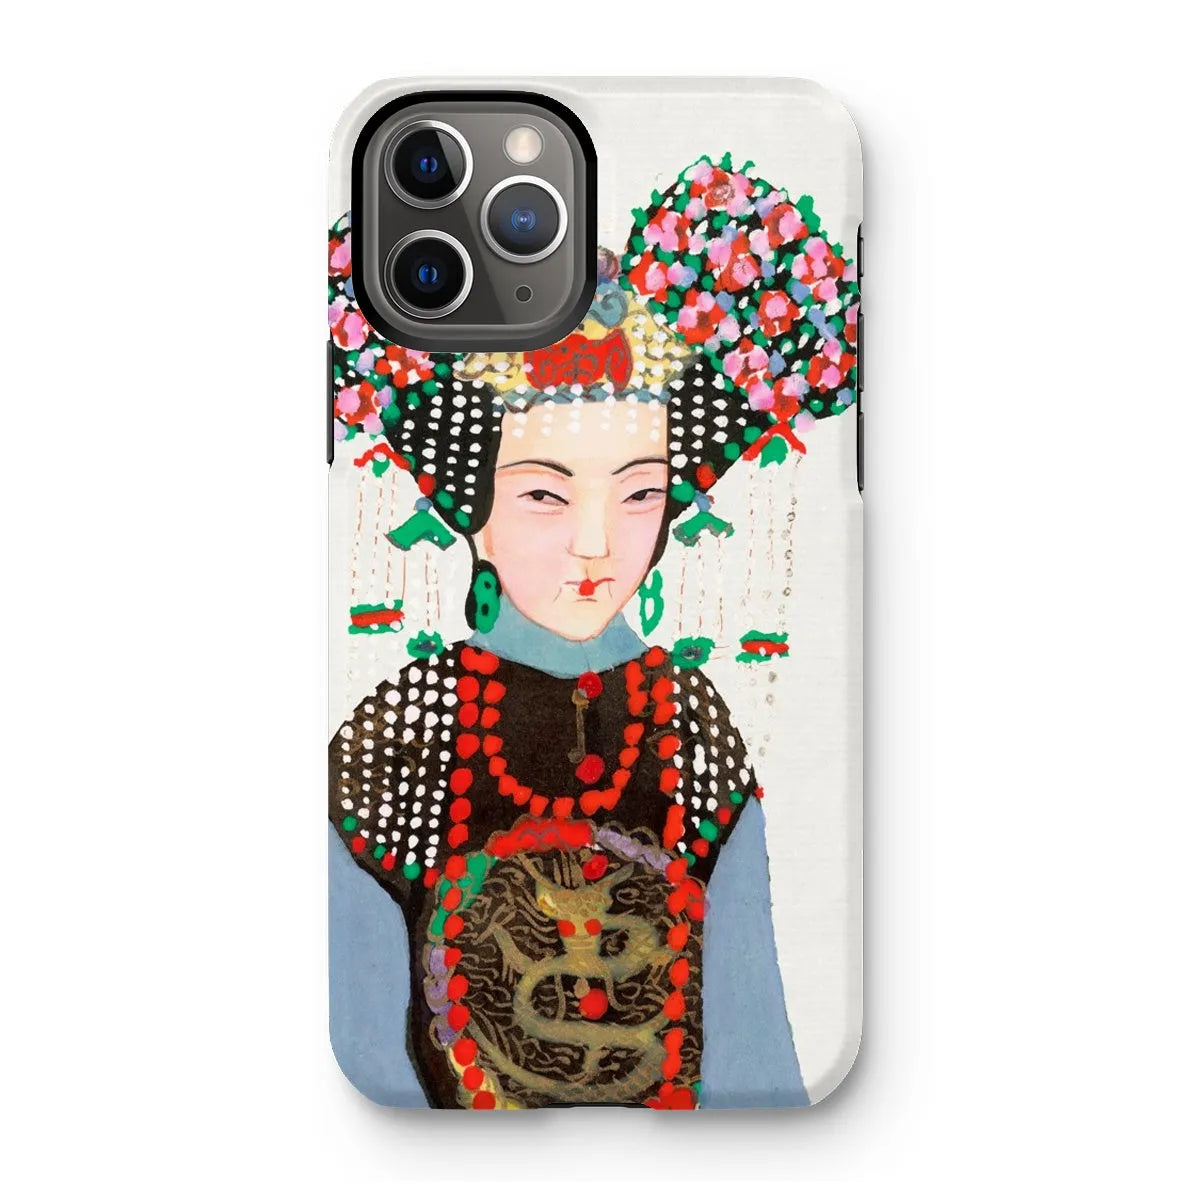 Chinese Empress - Manchu Art Phone Case - Iphone 11 Pro / Matte - Mobile Phone Cases - Aesthetic Art